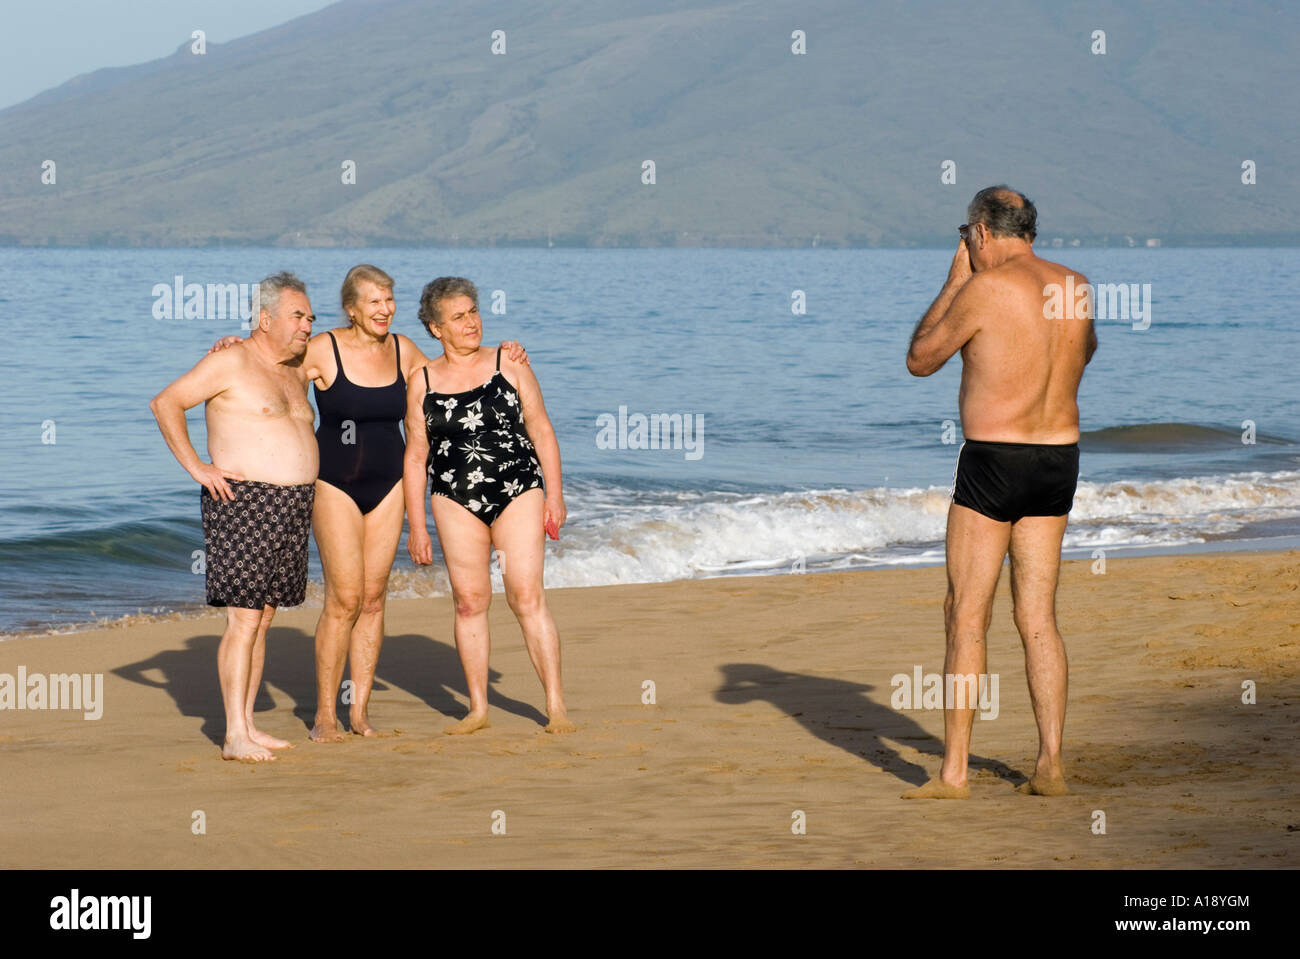 Taking a Photograph on the Beach in Maui, Hawaii Stock Photo